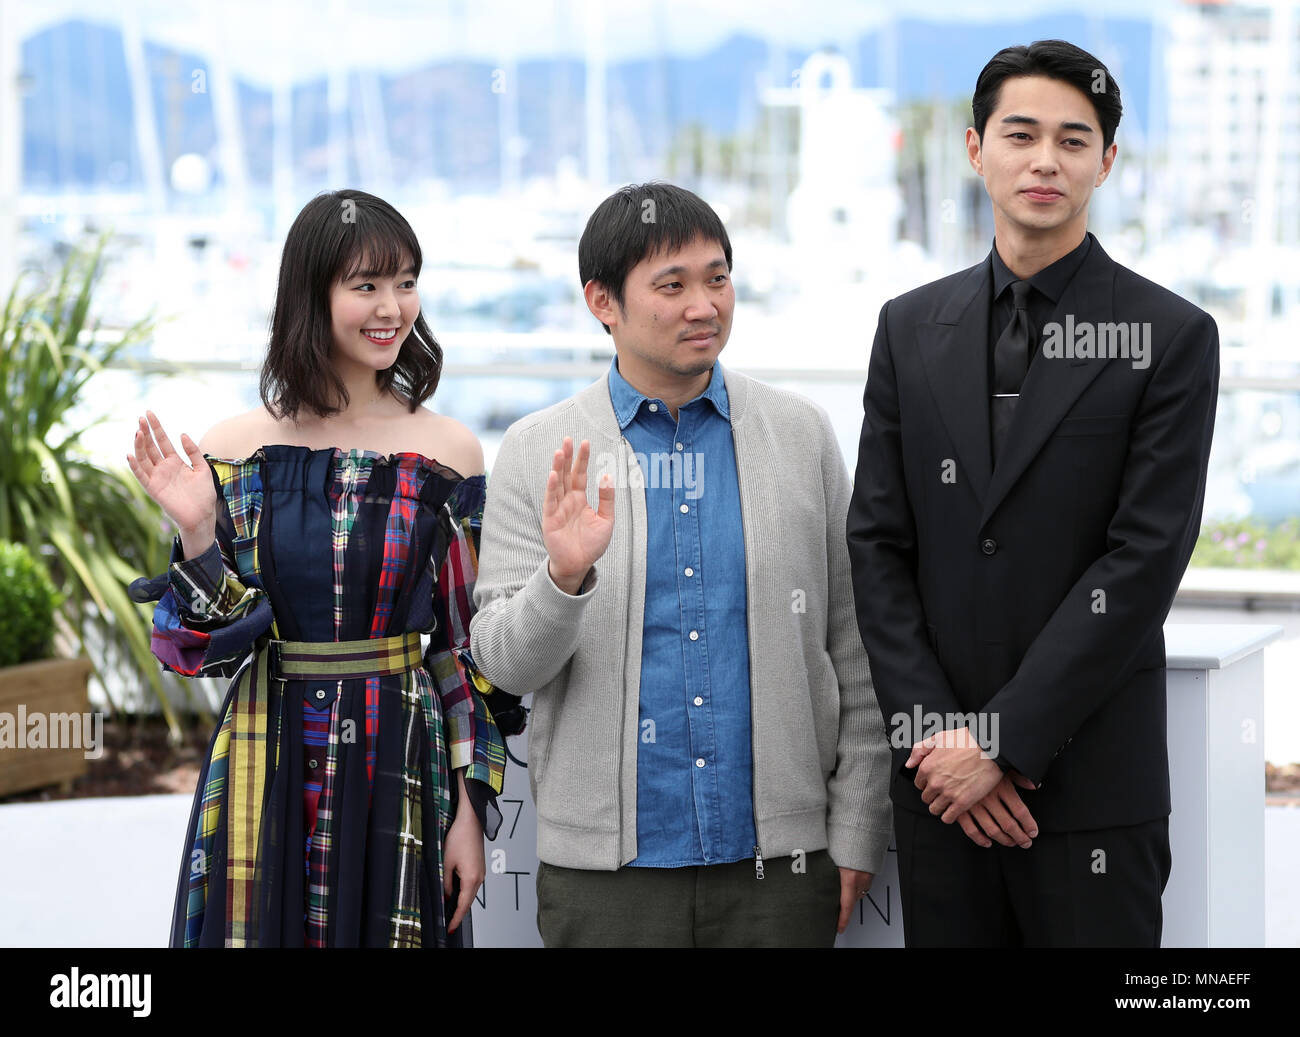 Cannes, France. 15th May, 2018. Actress Erika Karata, director Ryusuke Hamaguchi and actor Masahiro Higashide (from L to R) of the film 'Asako I & II (Netemo Sametemo)' pose during a photocall at the 71st Cannes International Film Festival in Cannes, France, on May 15, 2018. The 71st Cannes International Film Festival is held from May 8 to May 19. Credit: Luo Huanhuan/Xinhua/Alamy Live News Stock Photo